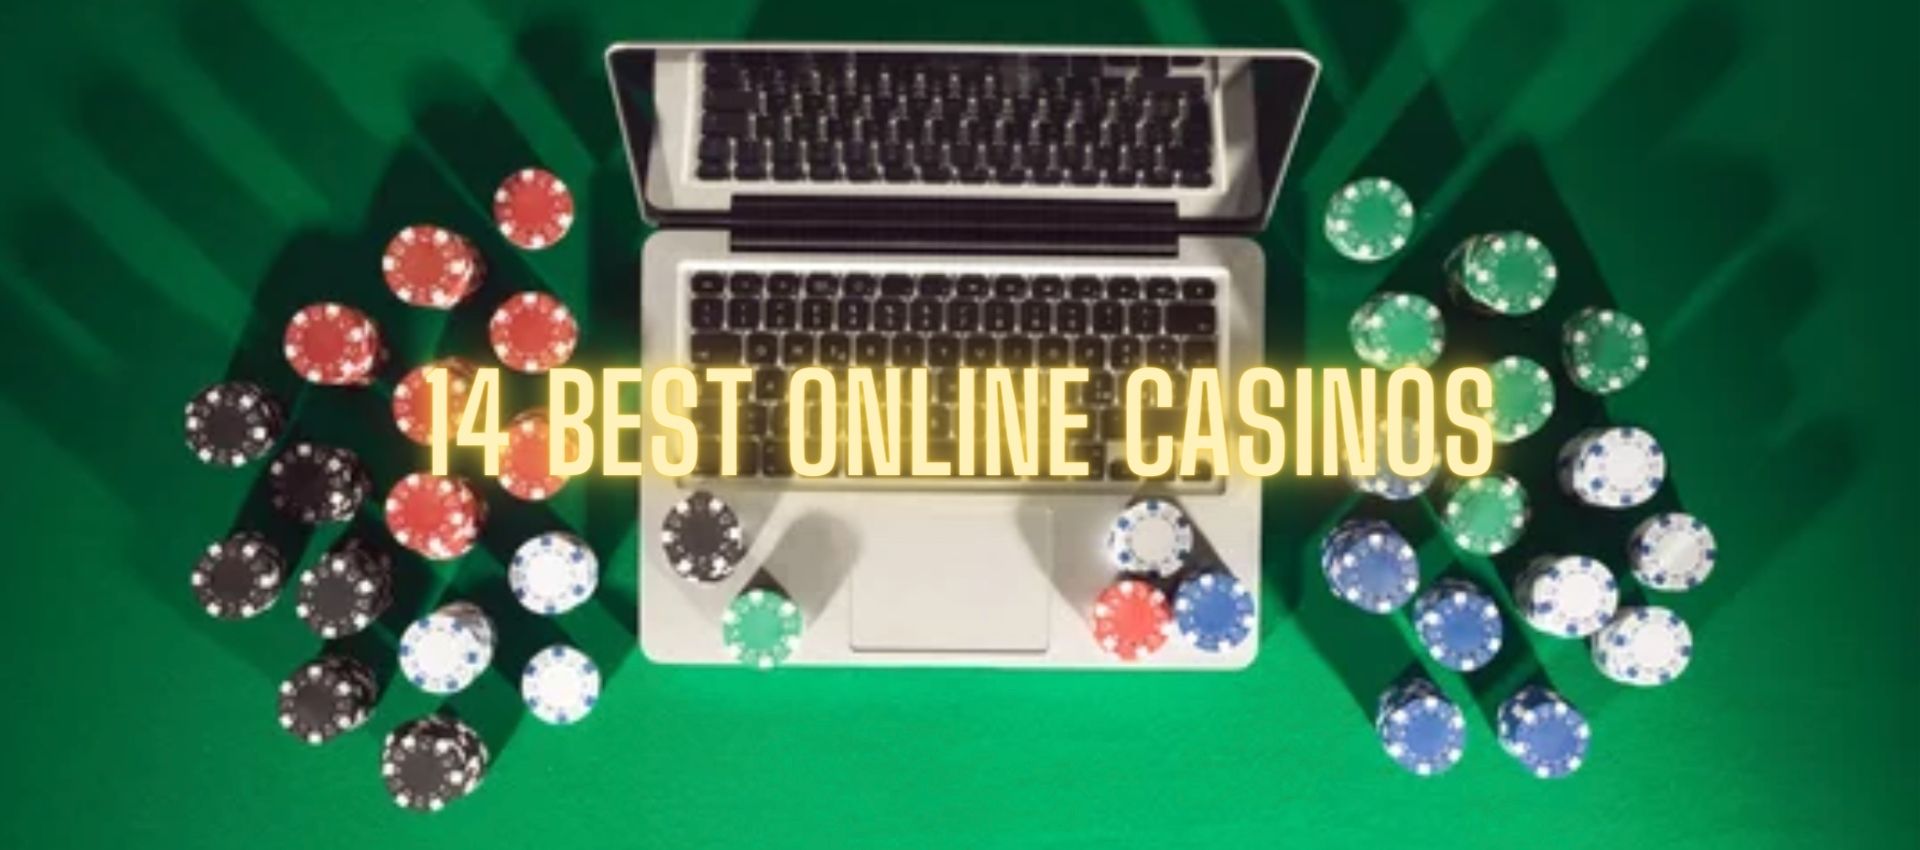 14 best casino online that provide their services in 2023